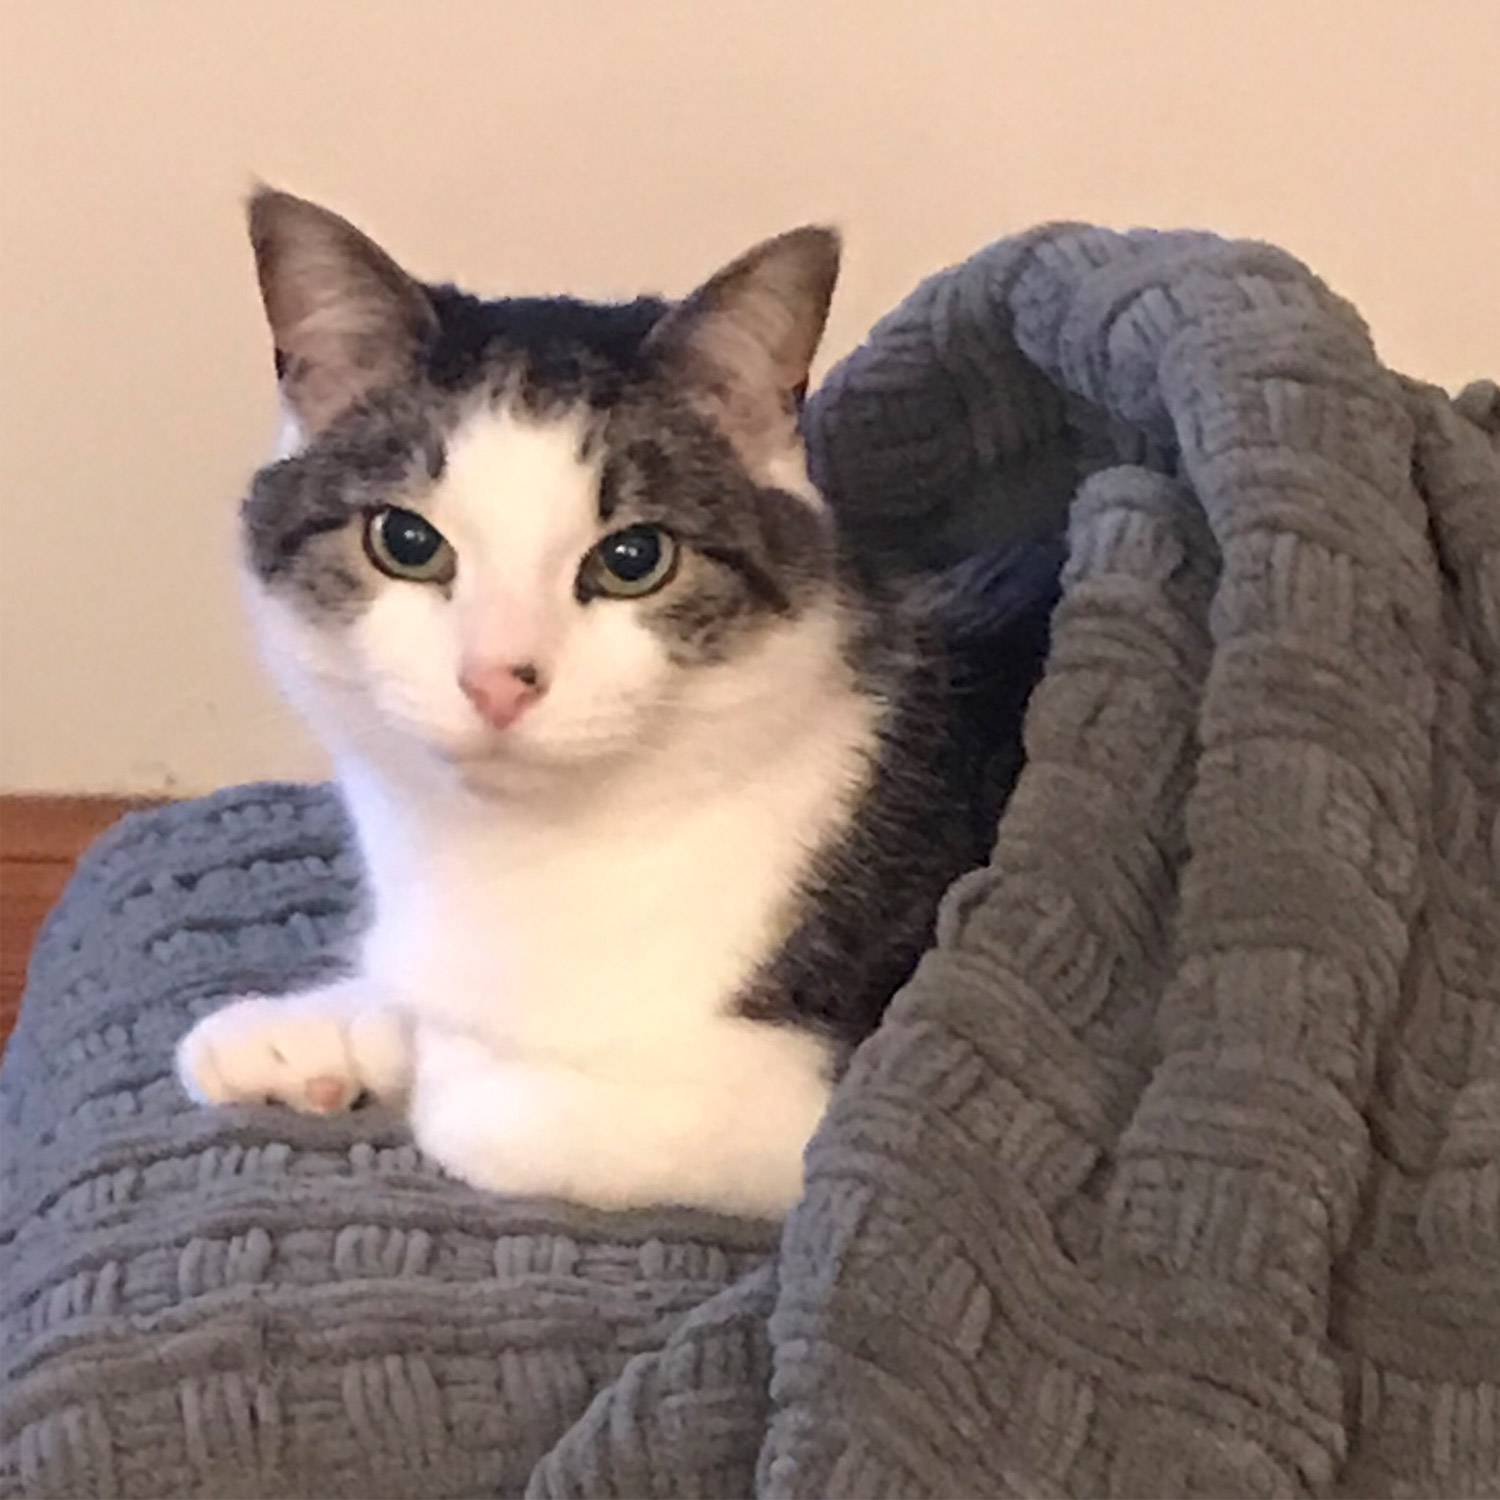 Fran b In manchester nh sent a picture of noah her seven year old grey and white cat Fran says he loves to snuggle and is shown snuggled into one of those new pita pocket style beds